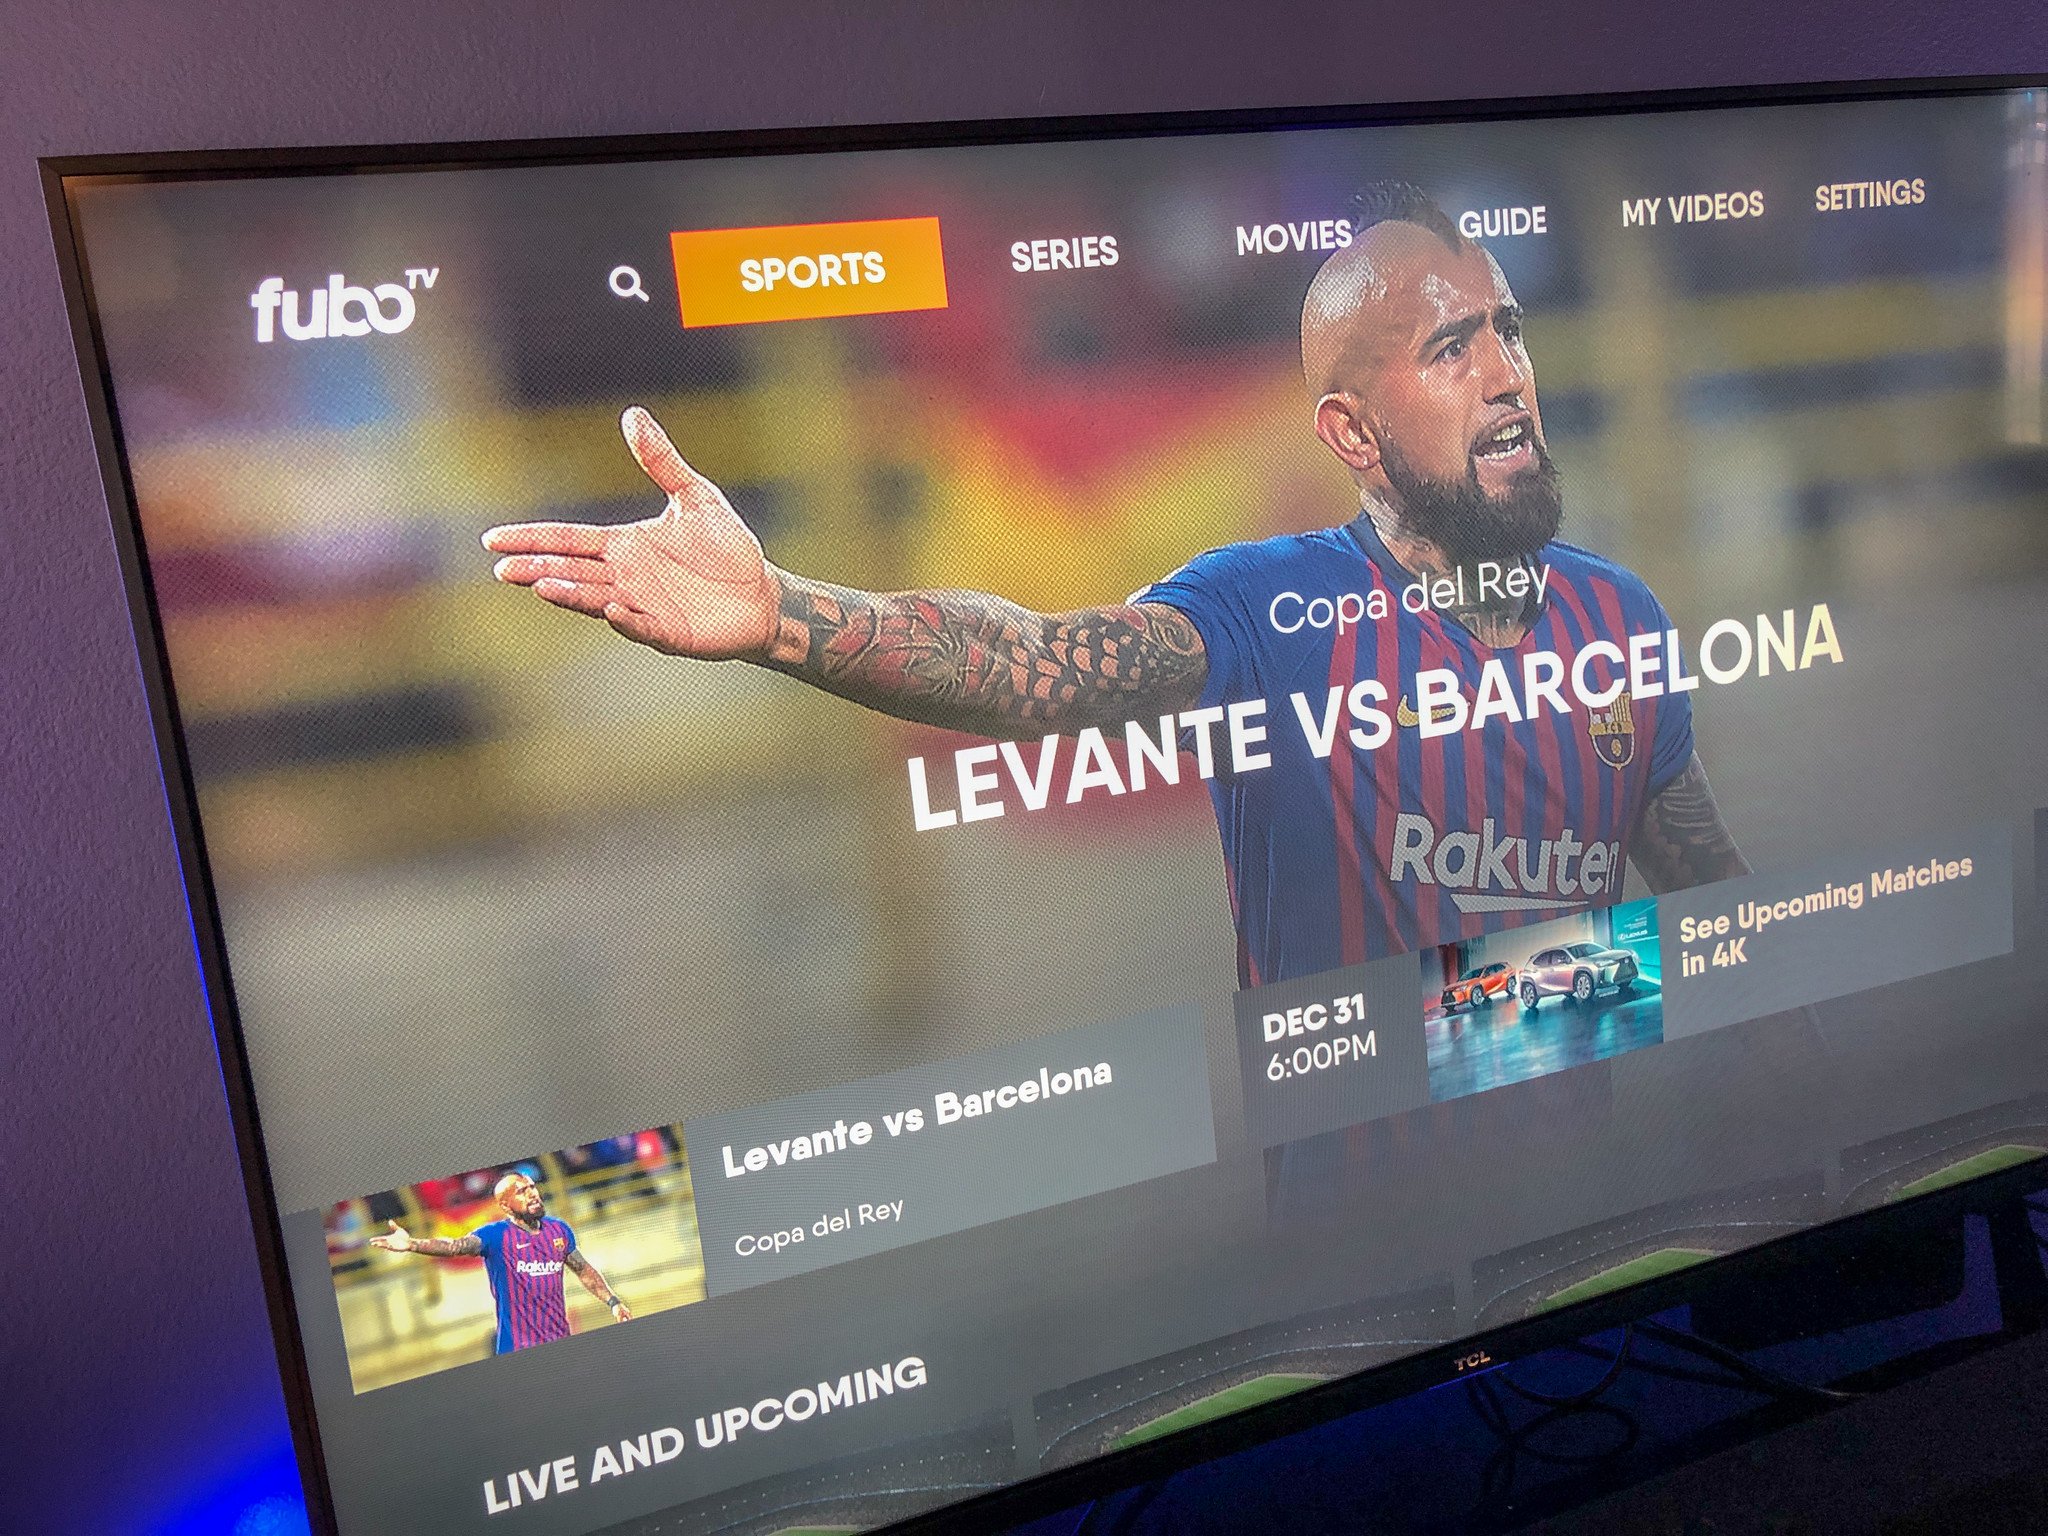 How fast does your internet need to be for Fubo TV? What to Watch